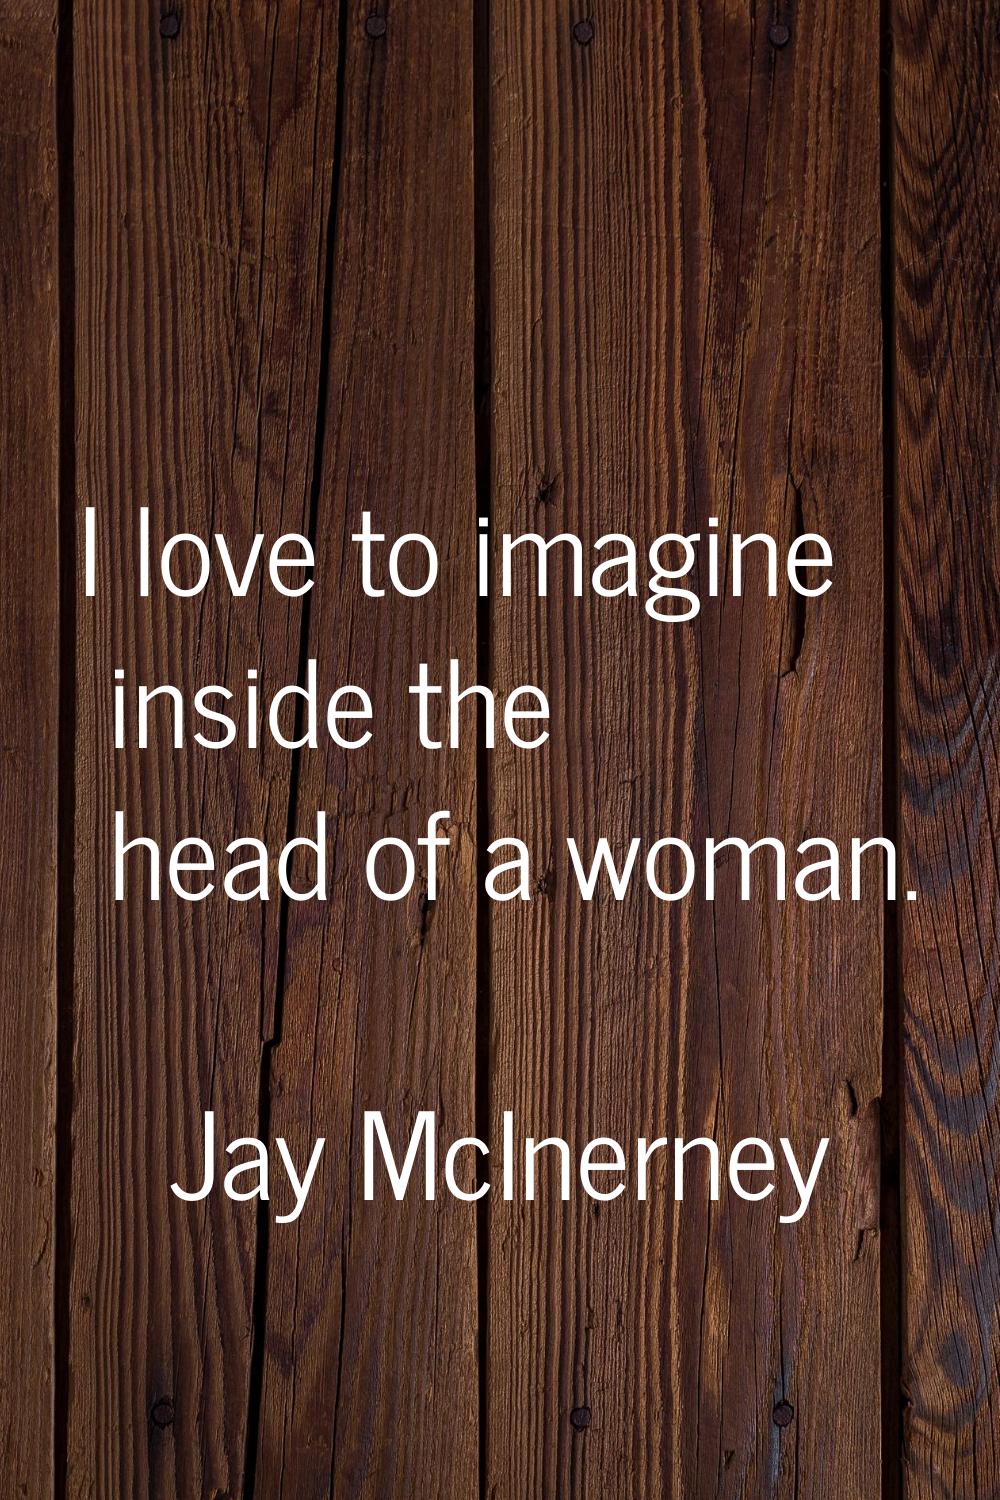 I love to imagine inside the head of a woman.